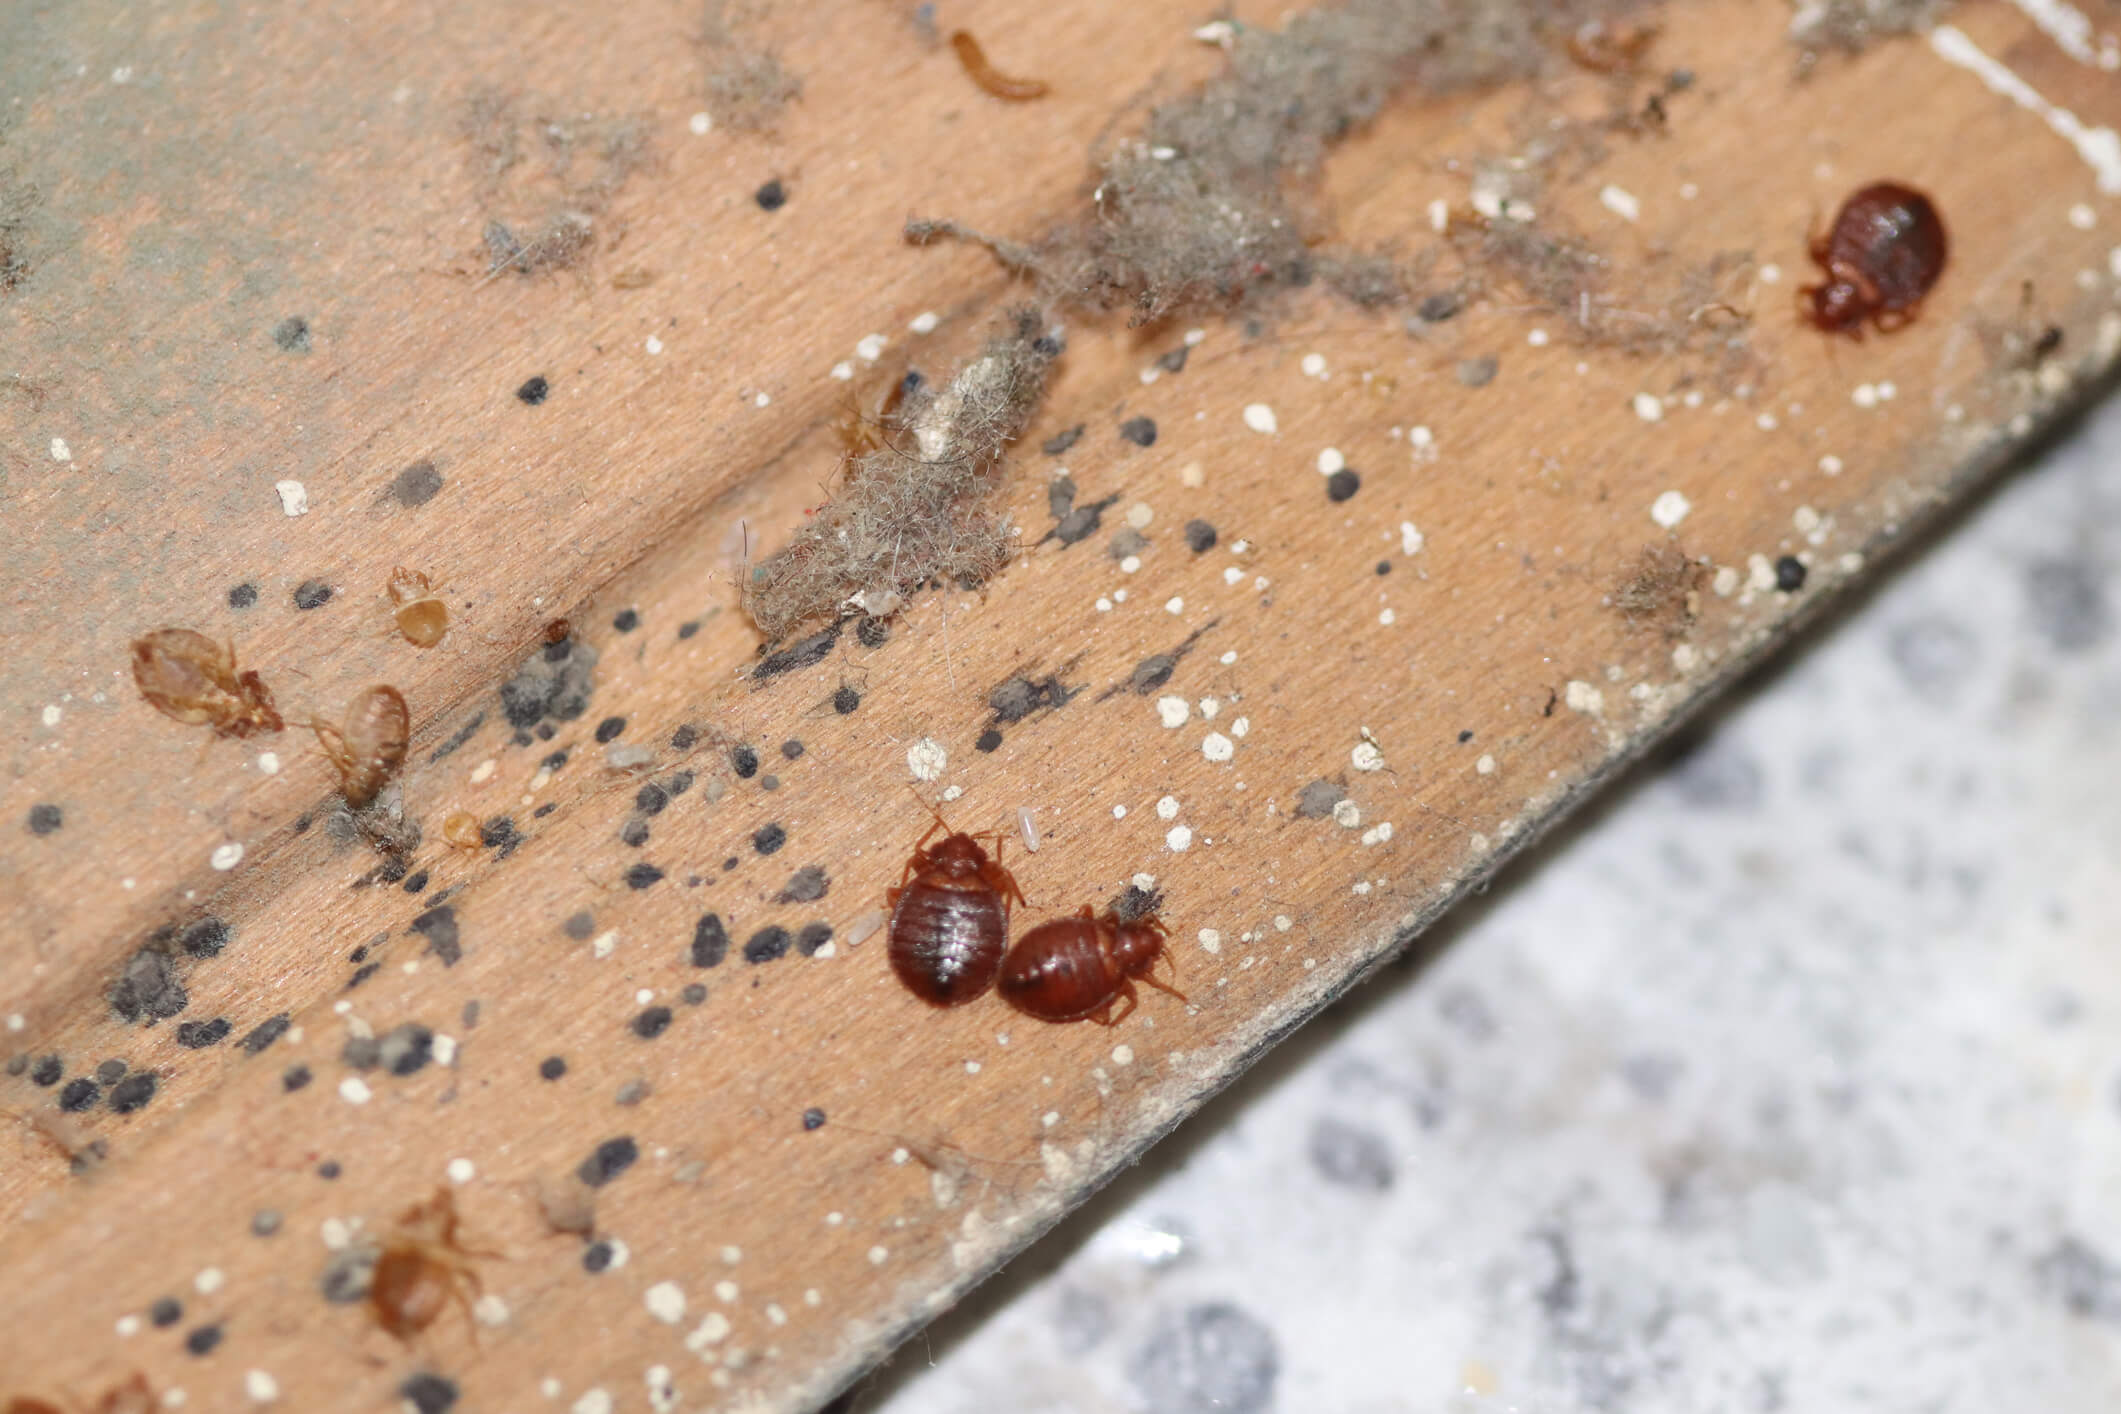 do bed bugs actually live inside the mattress